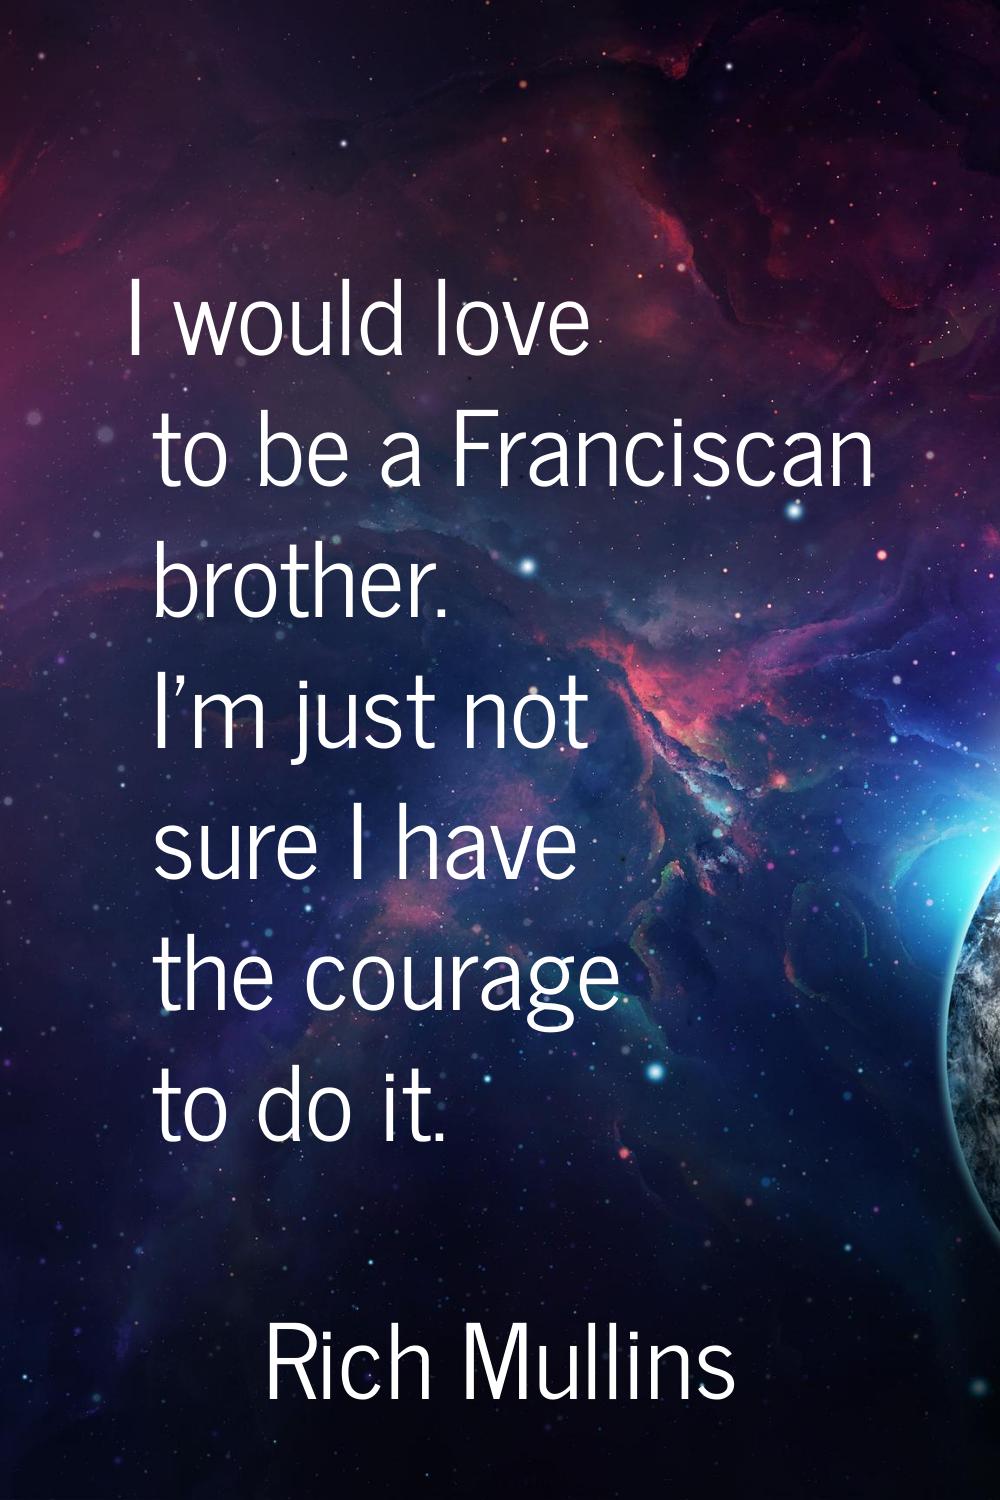 I would love to be a Franciscan brother. I'm just not sure I have the courage to do it.